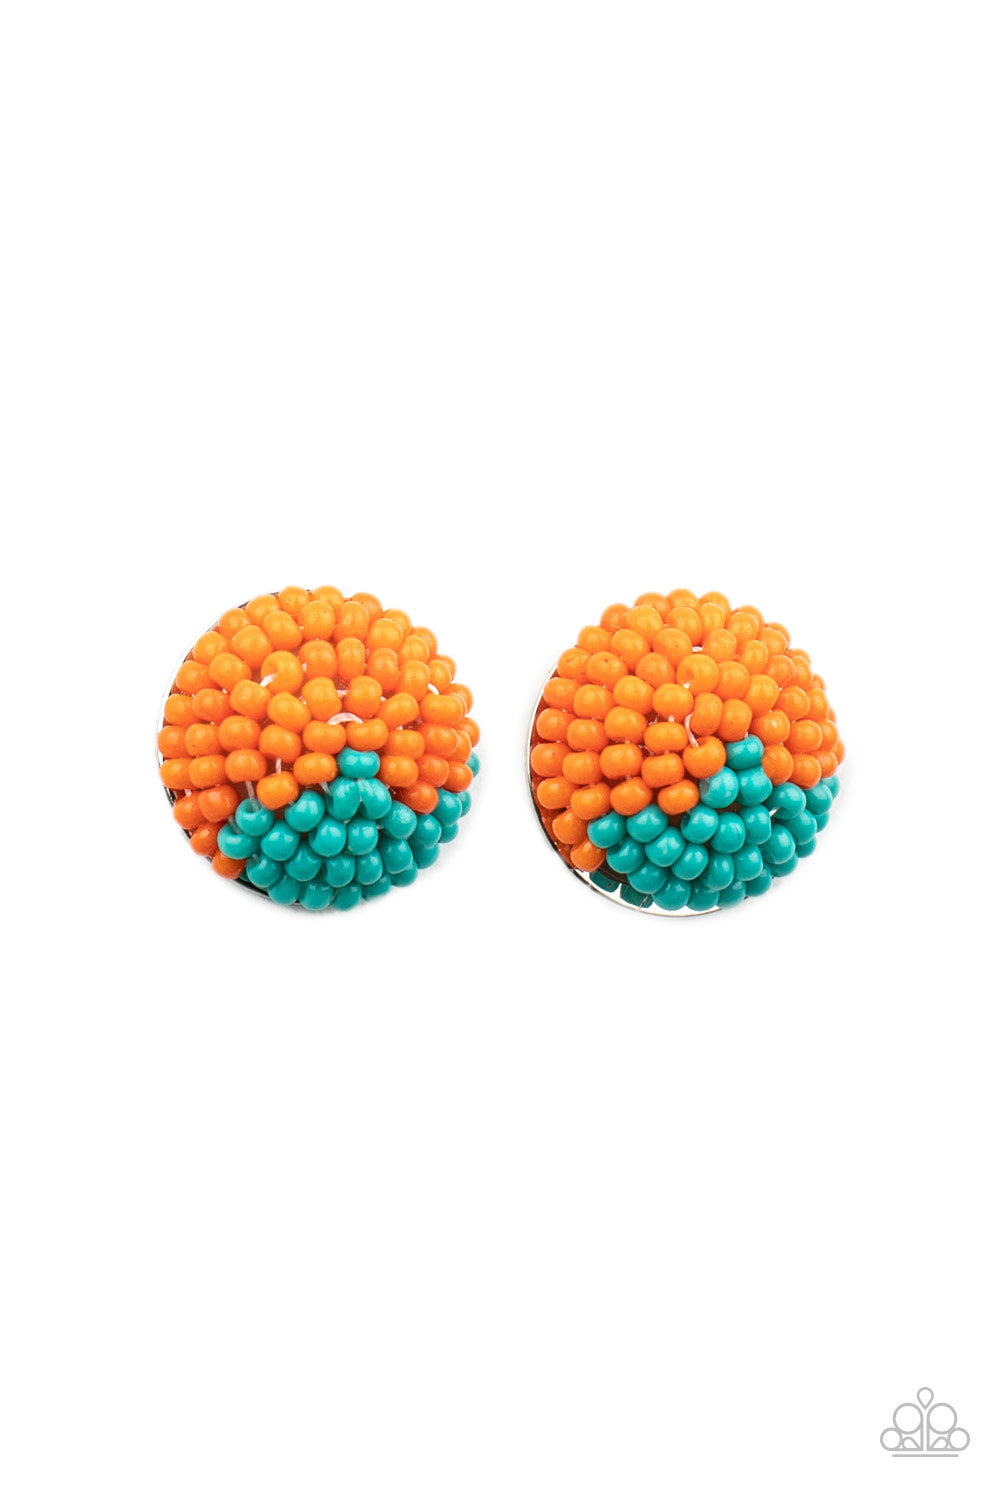 Paparazzi Accessories As Happy as Can BEAD - Orange Earrings a dainty collection of Amberglow and turquoise seed beads embellished the front of a circular frame, creating a colorful half and half pattern. Earring attaches to a standard post fitting.  Sold as one pair of post earrings.